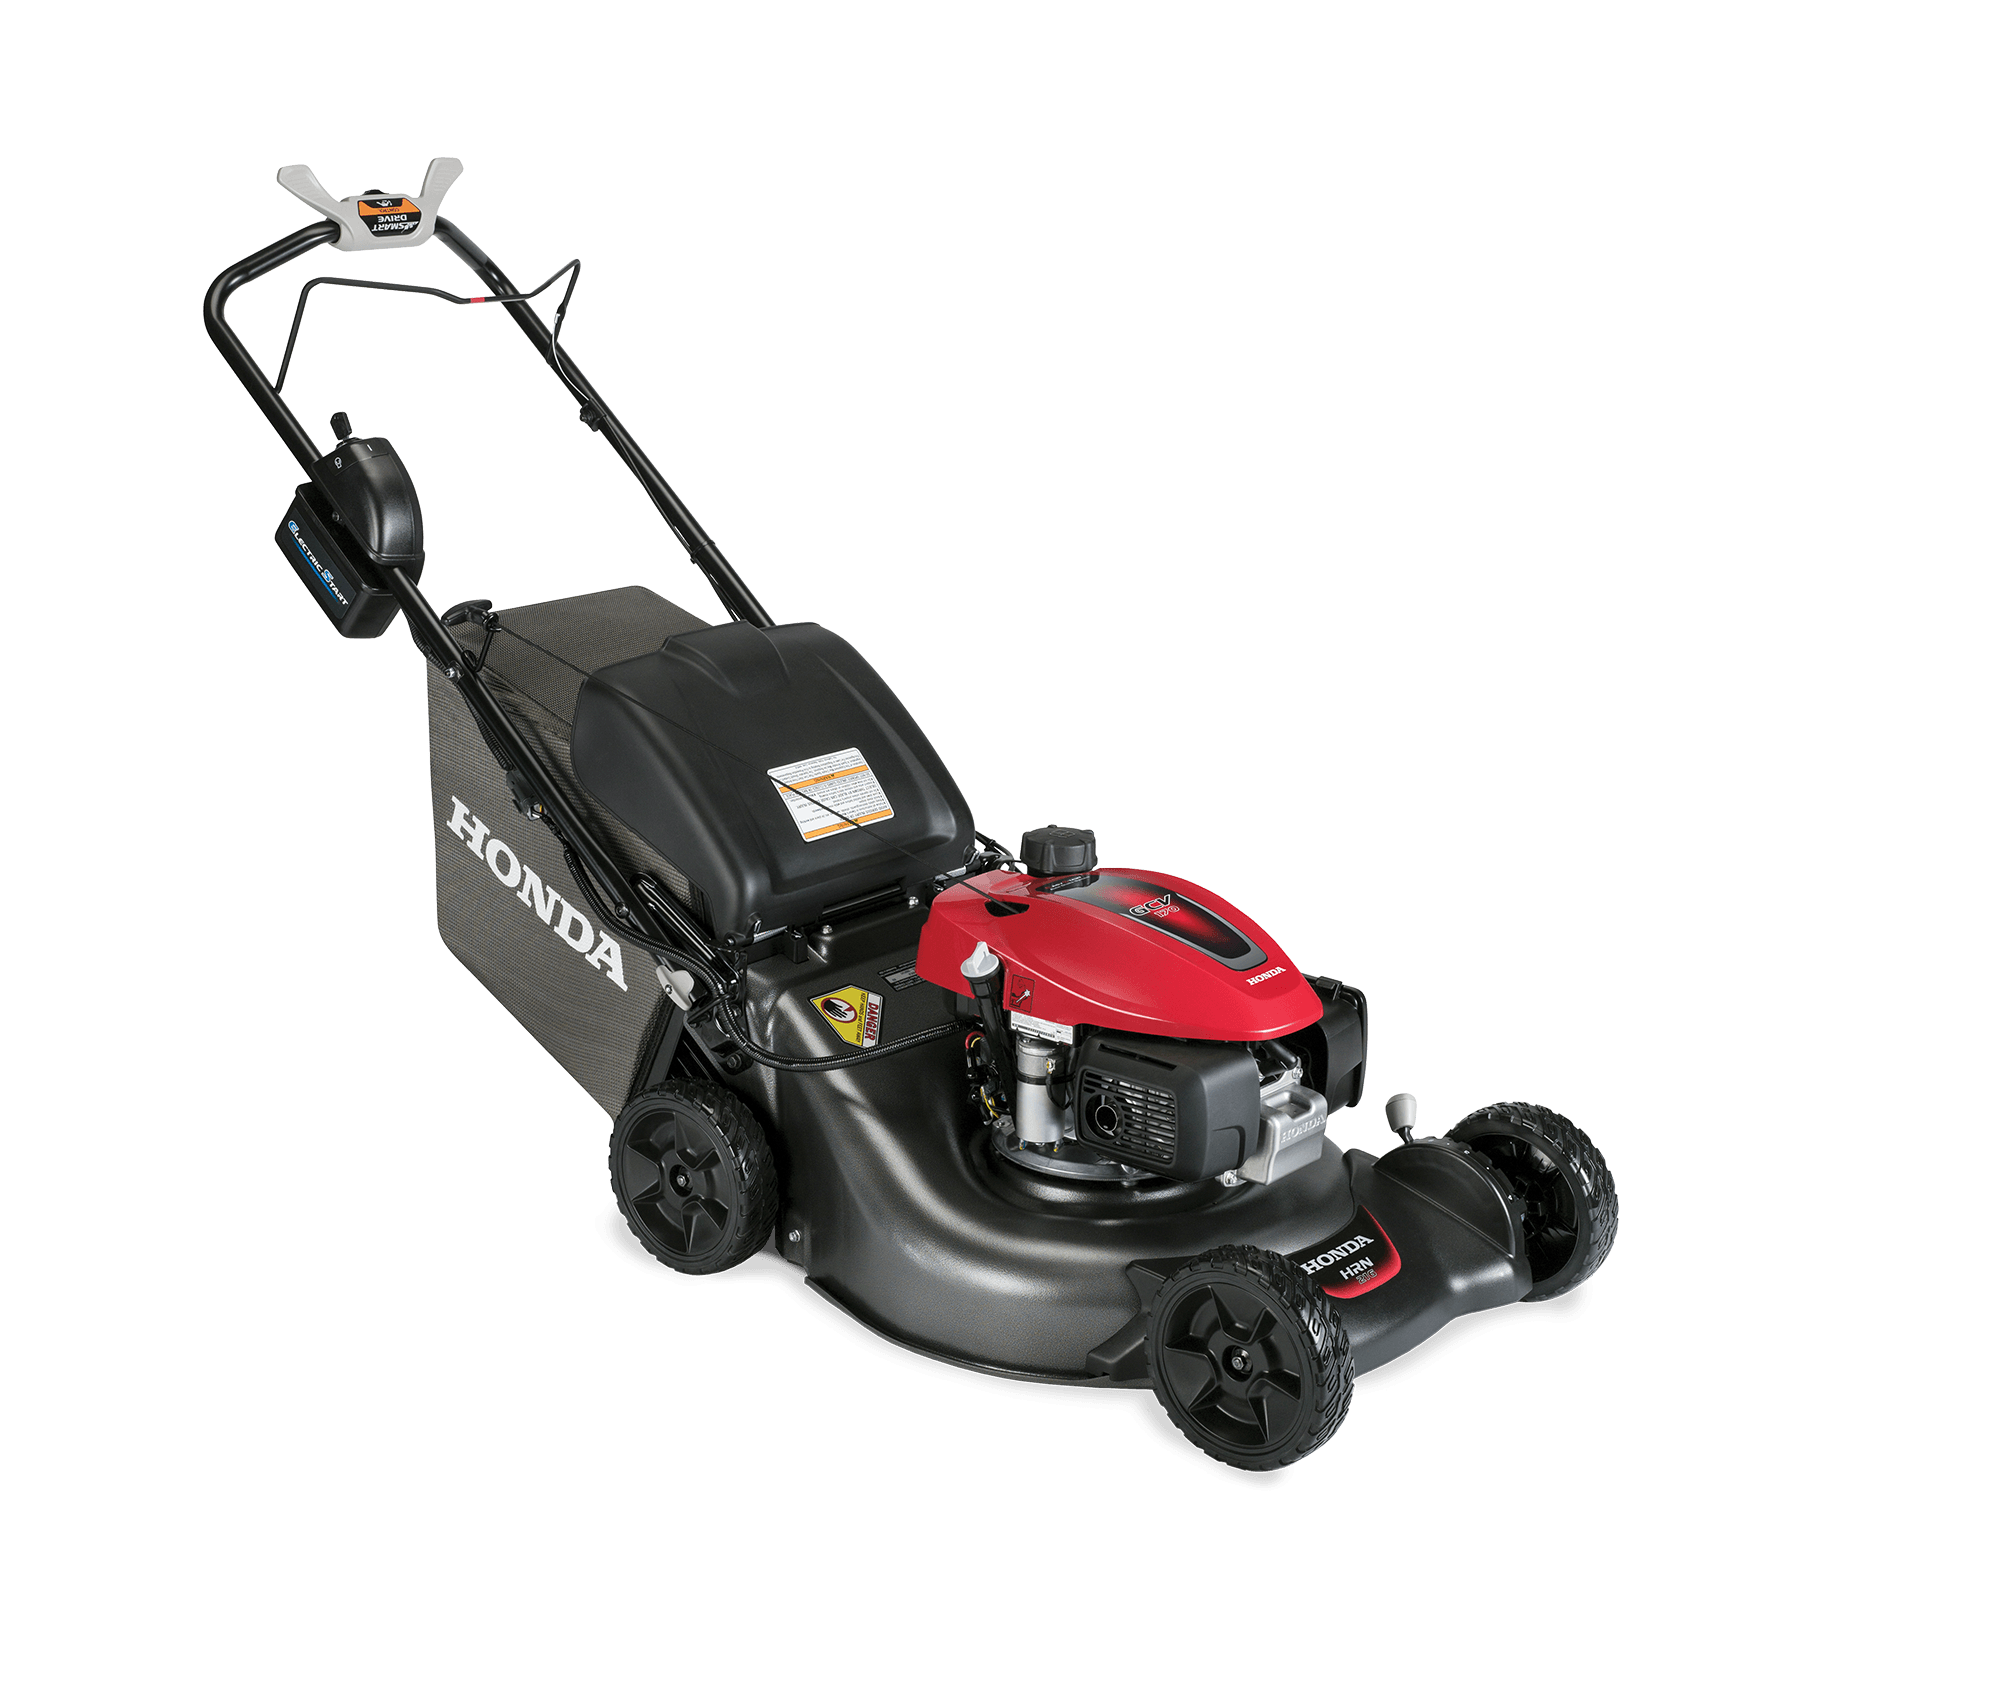 Image of the HRN Smart-Drive Electric Start Lawn Mower